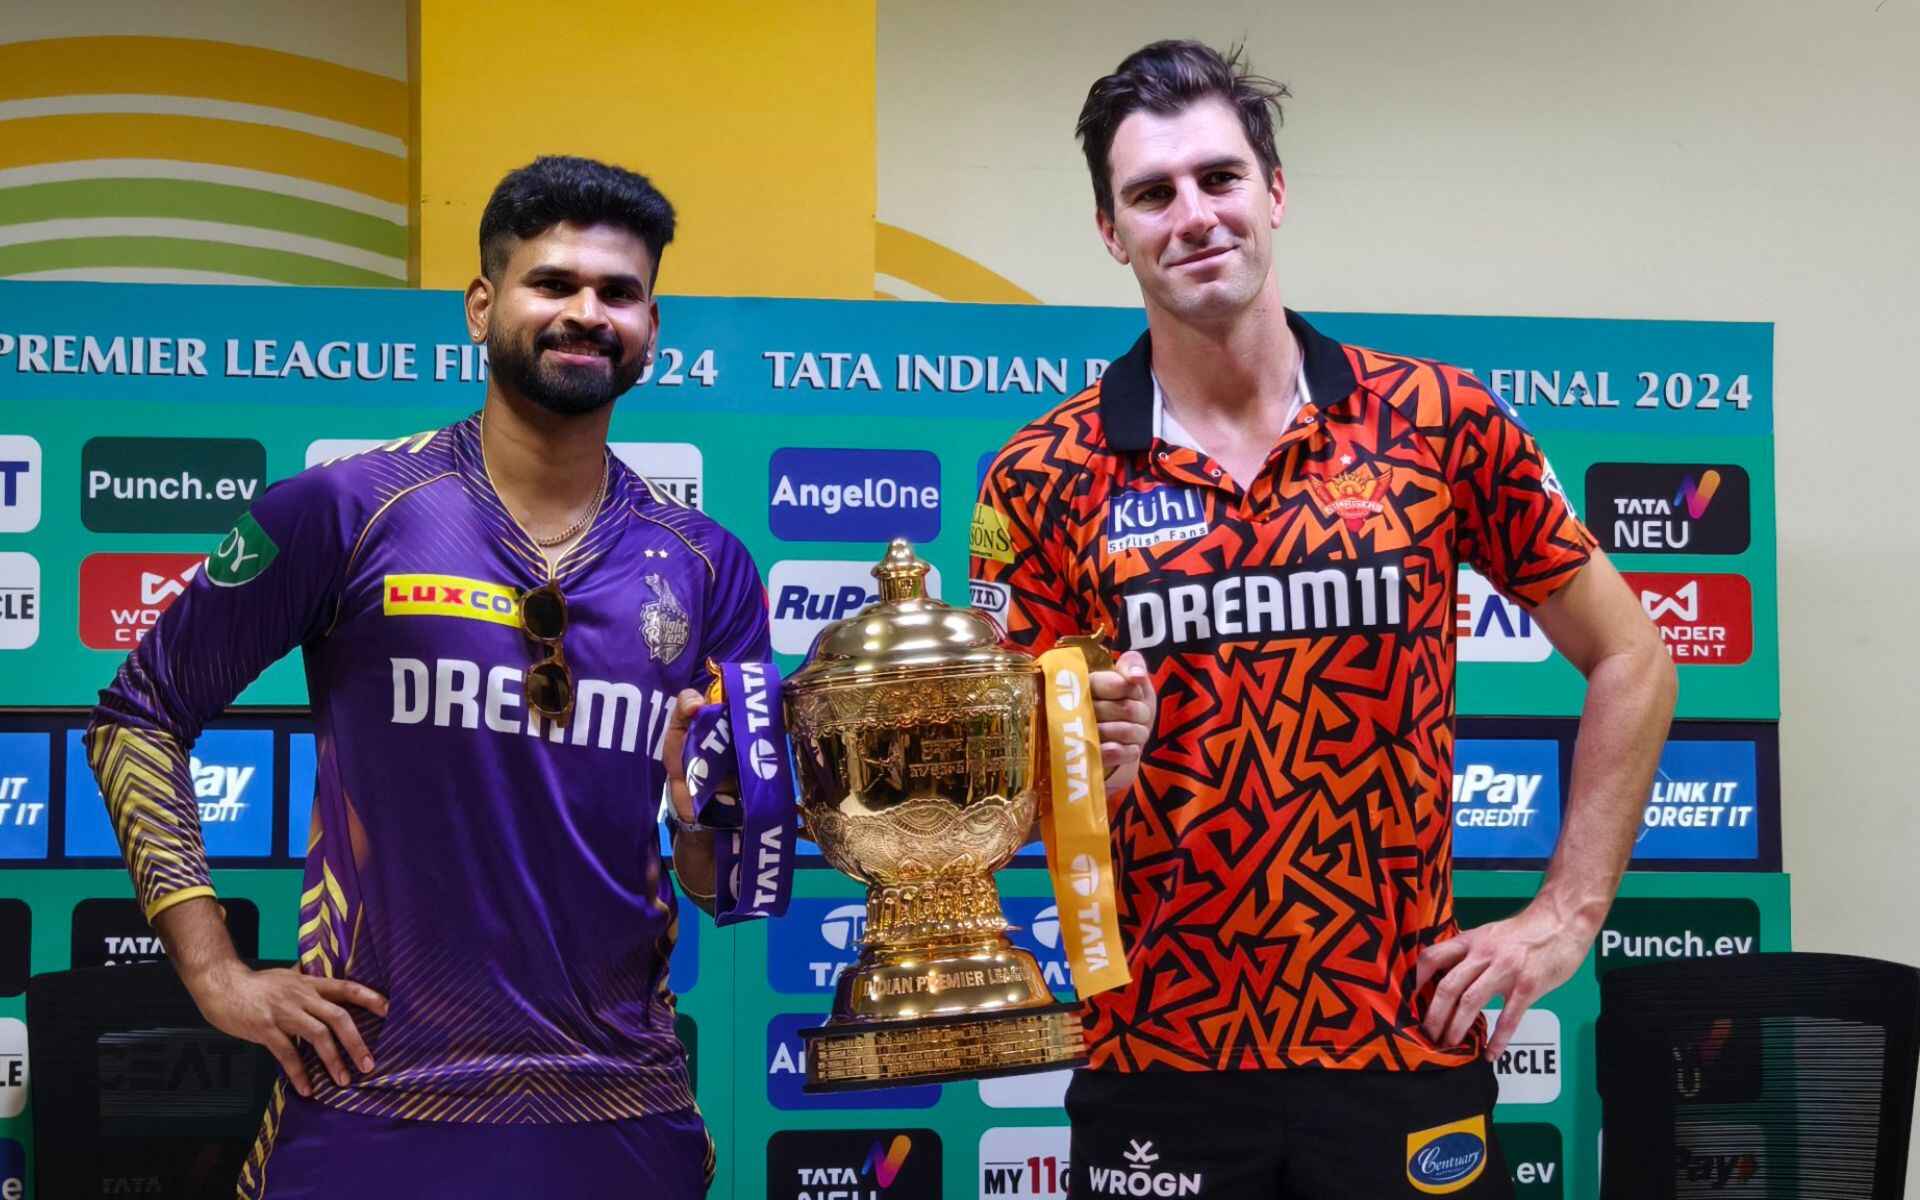 How Much Is The IPL Final Prize Money For 2024?